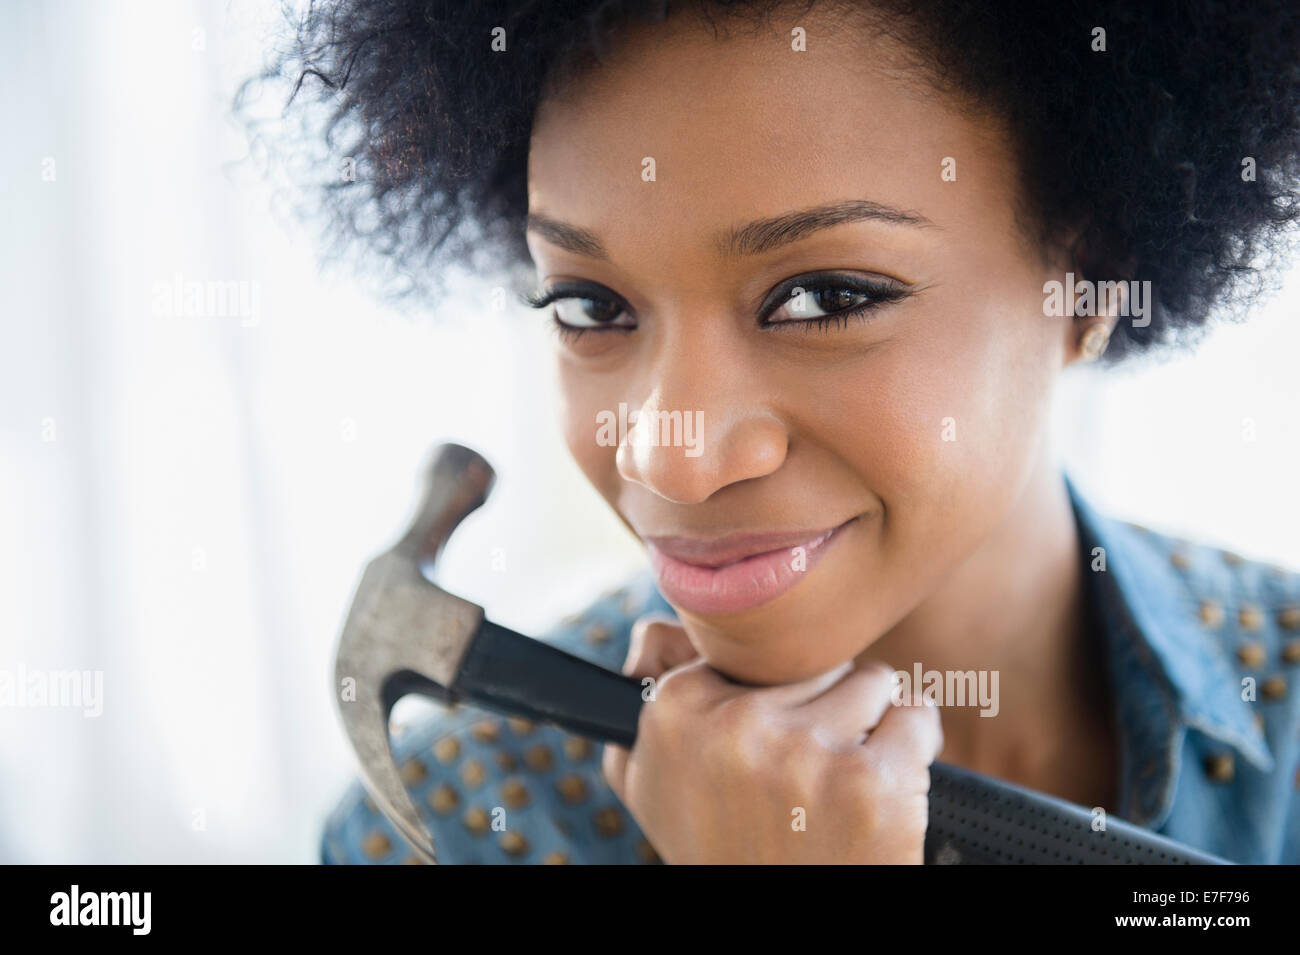 African American Woman holding hammer Banque D'Images